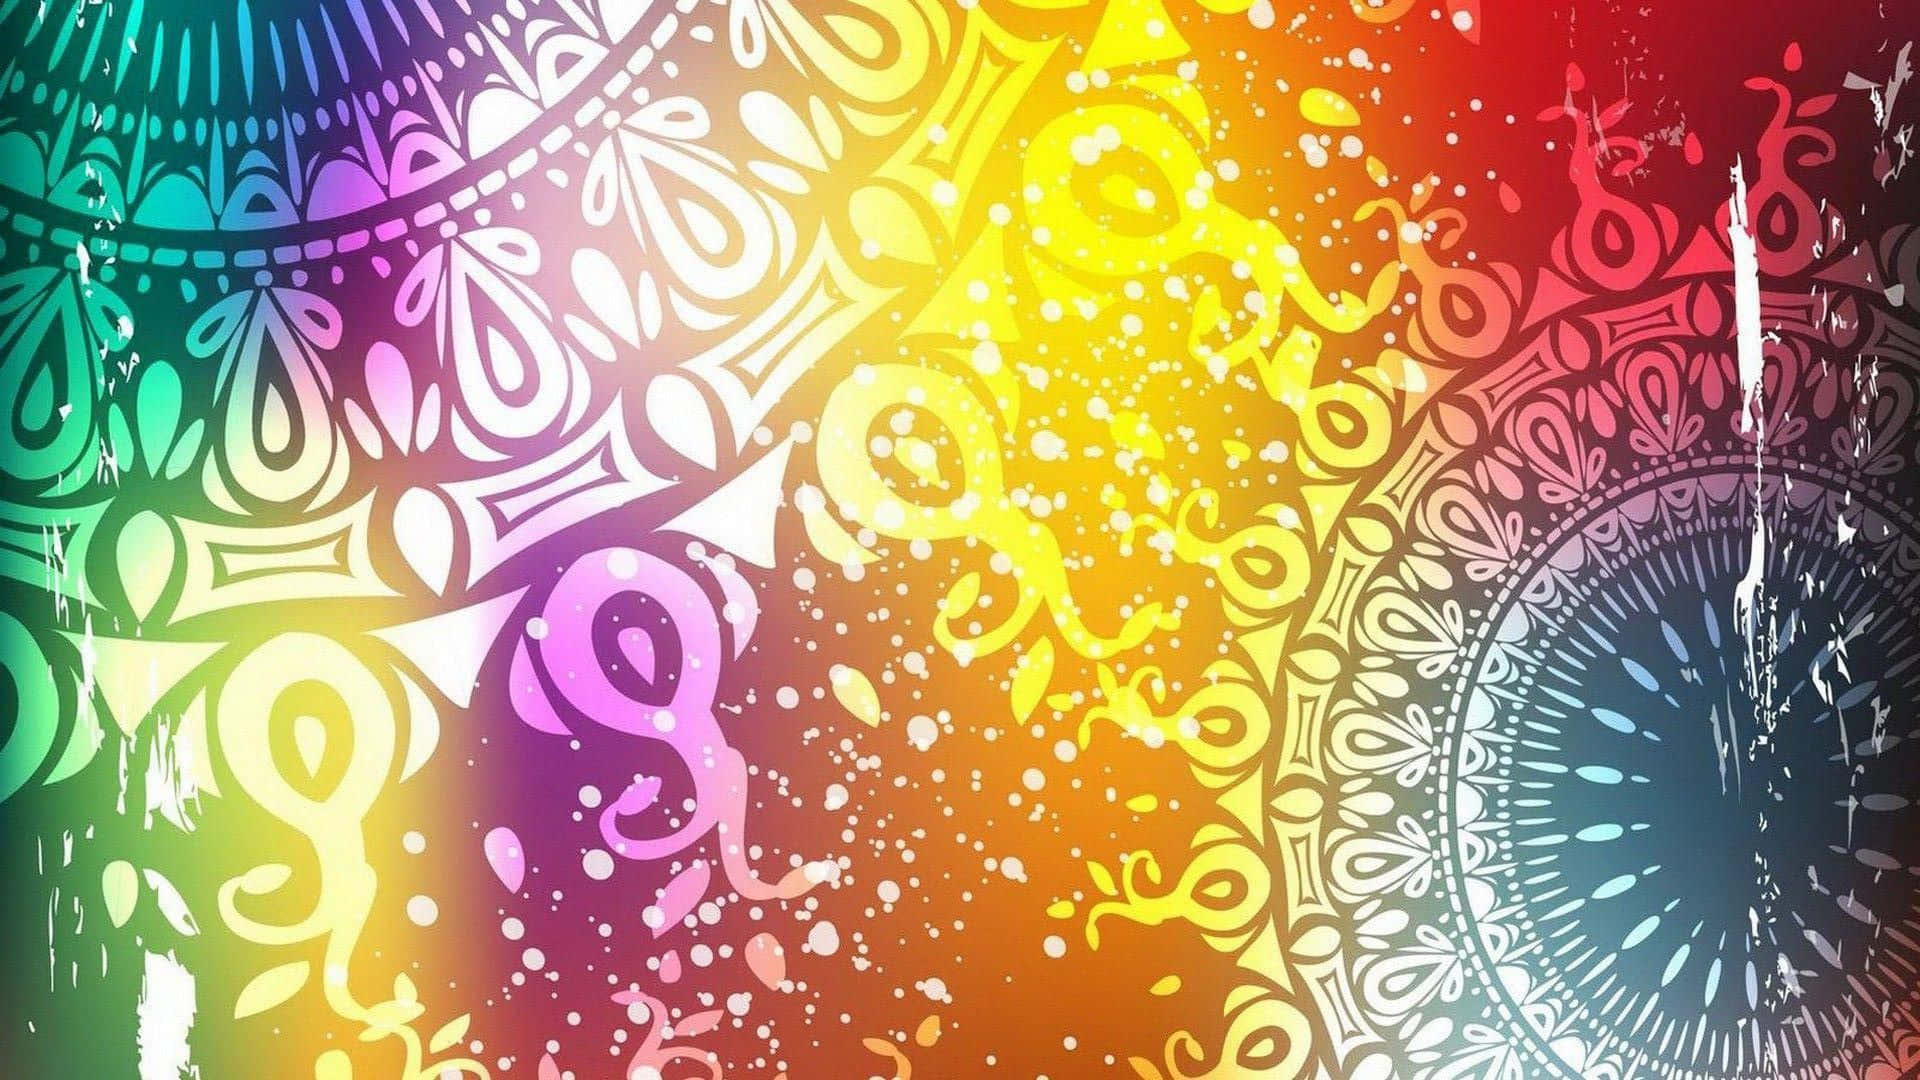 A beautiful colorful wallpaper to light up your screen